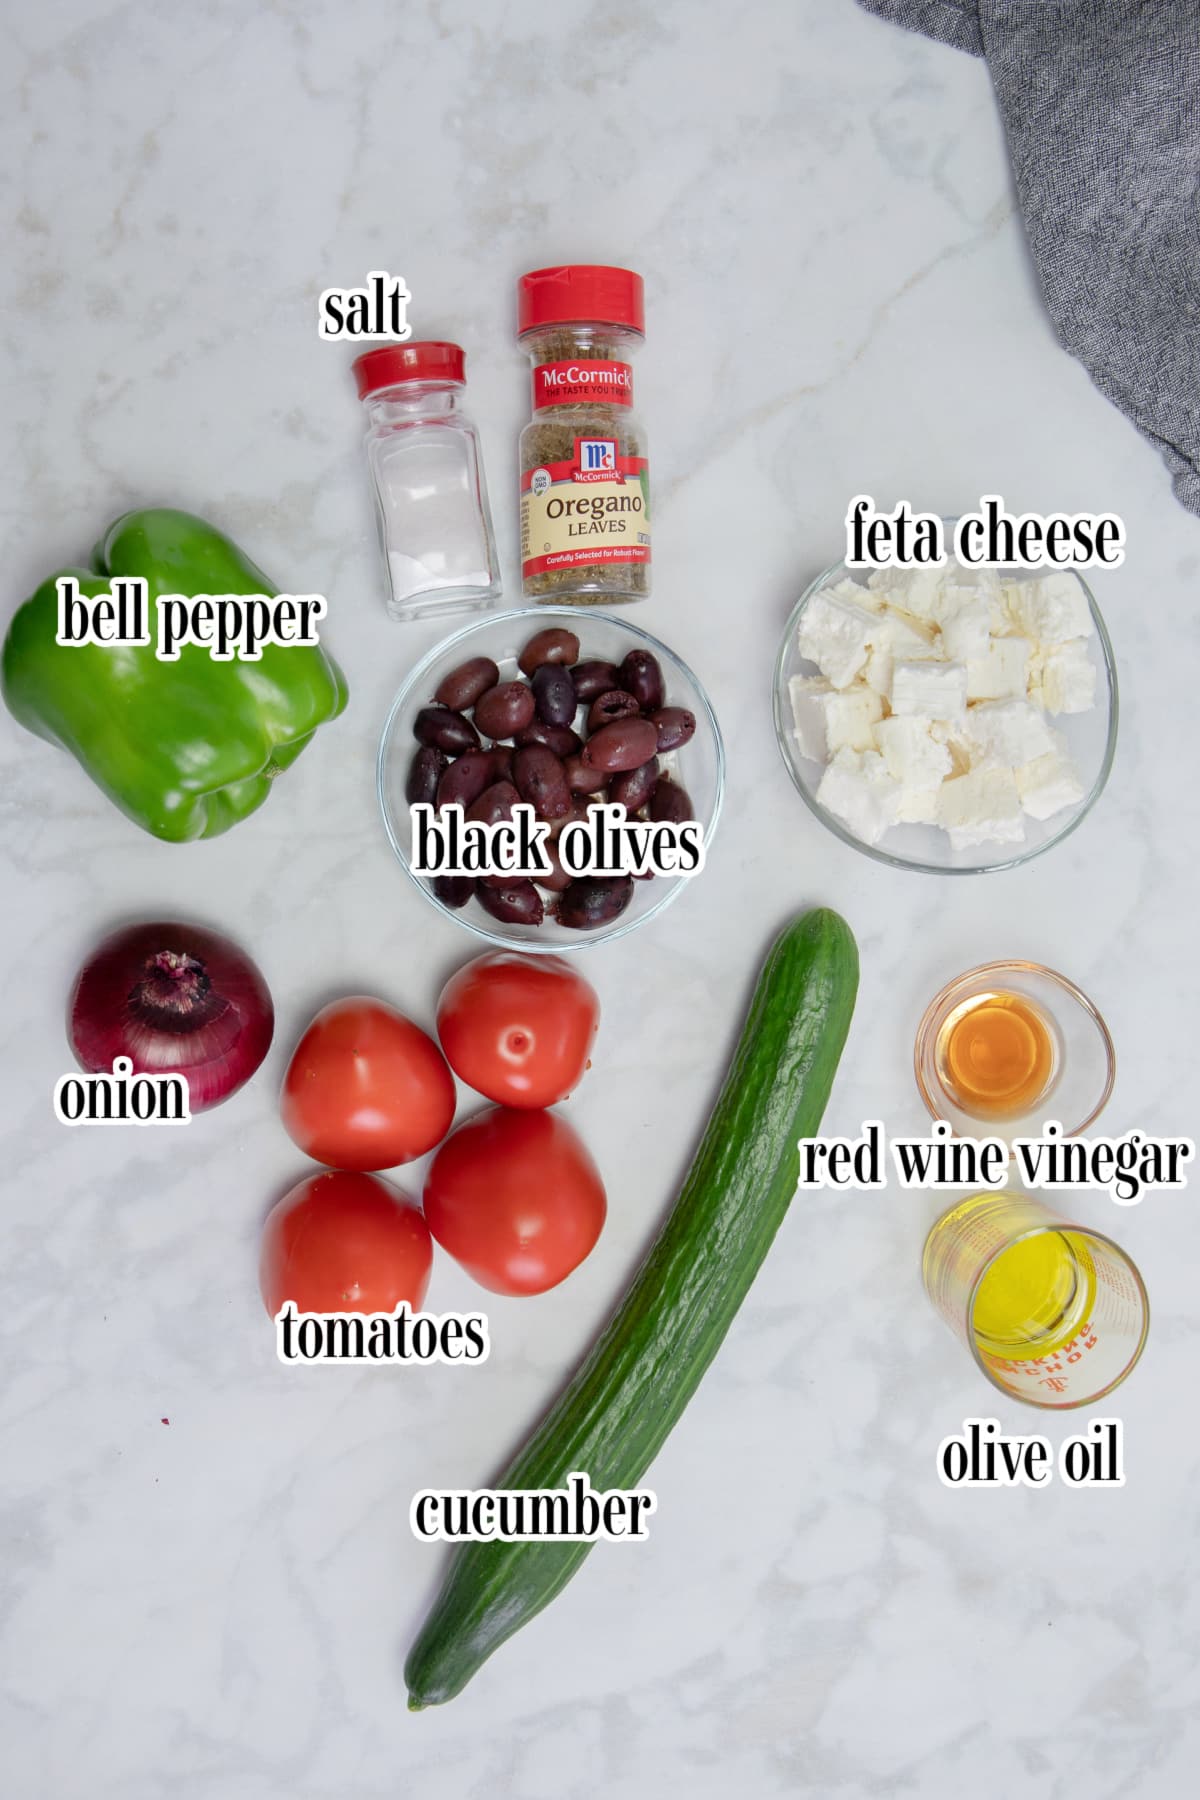 Greek salad ingredients on a white surface.